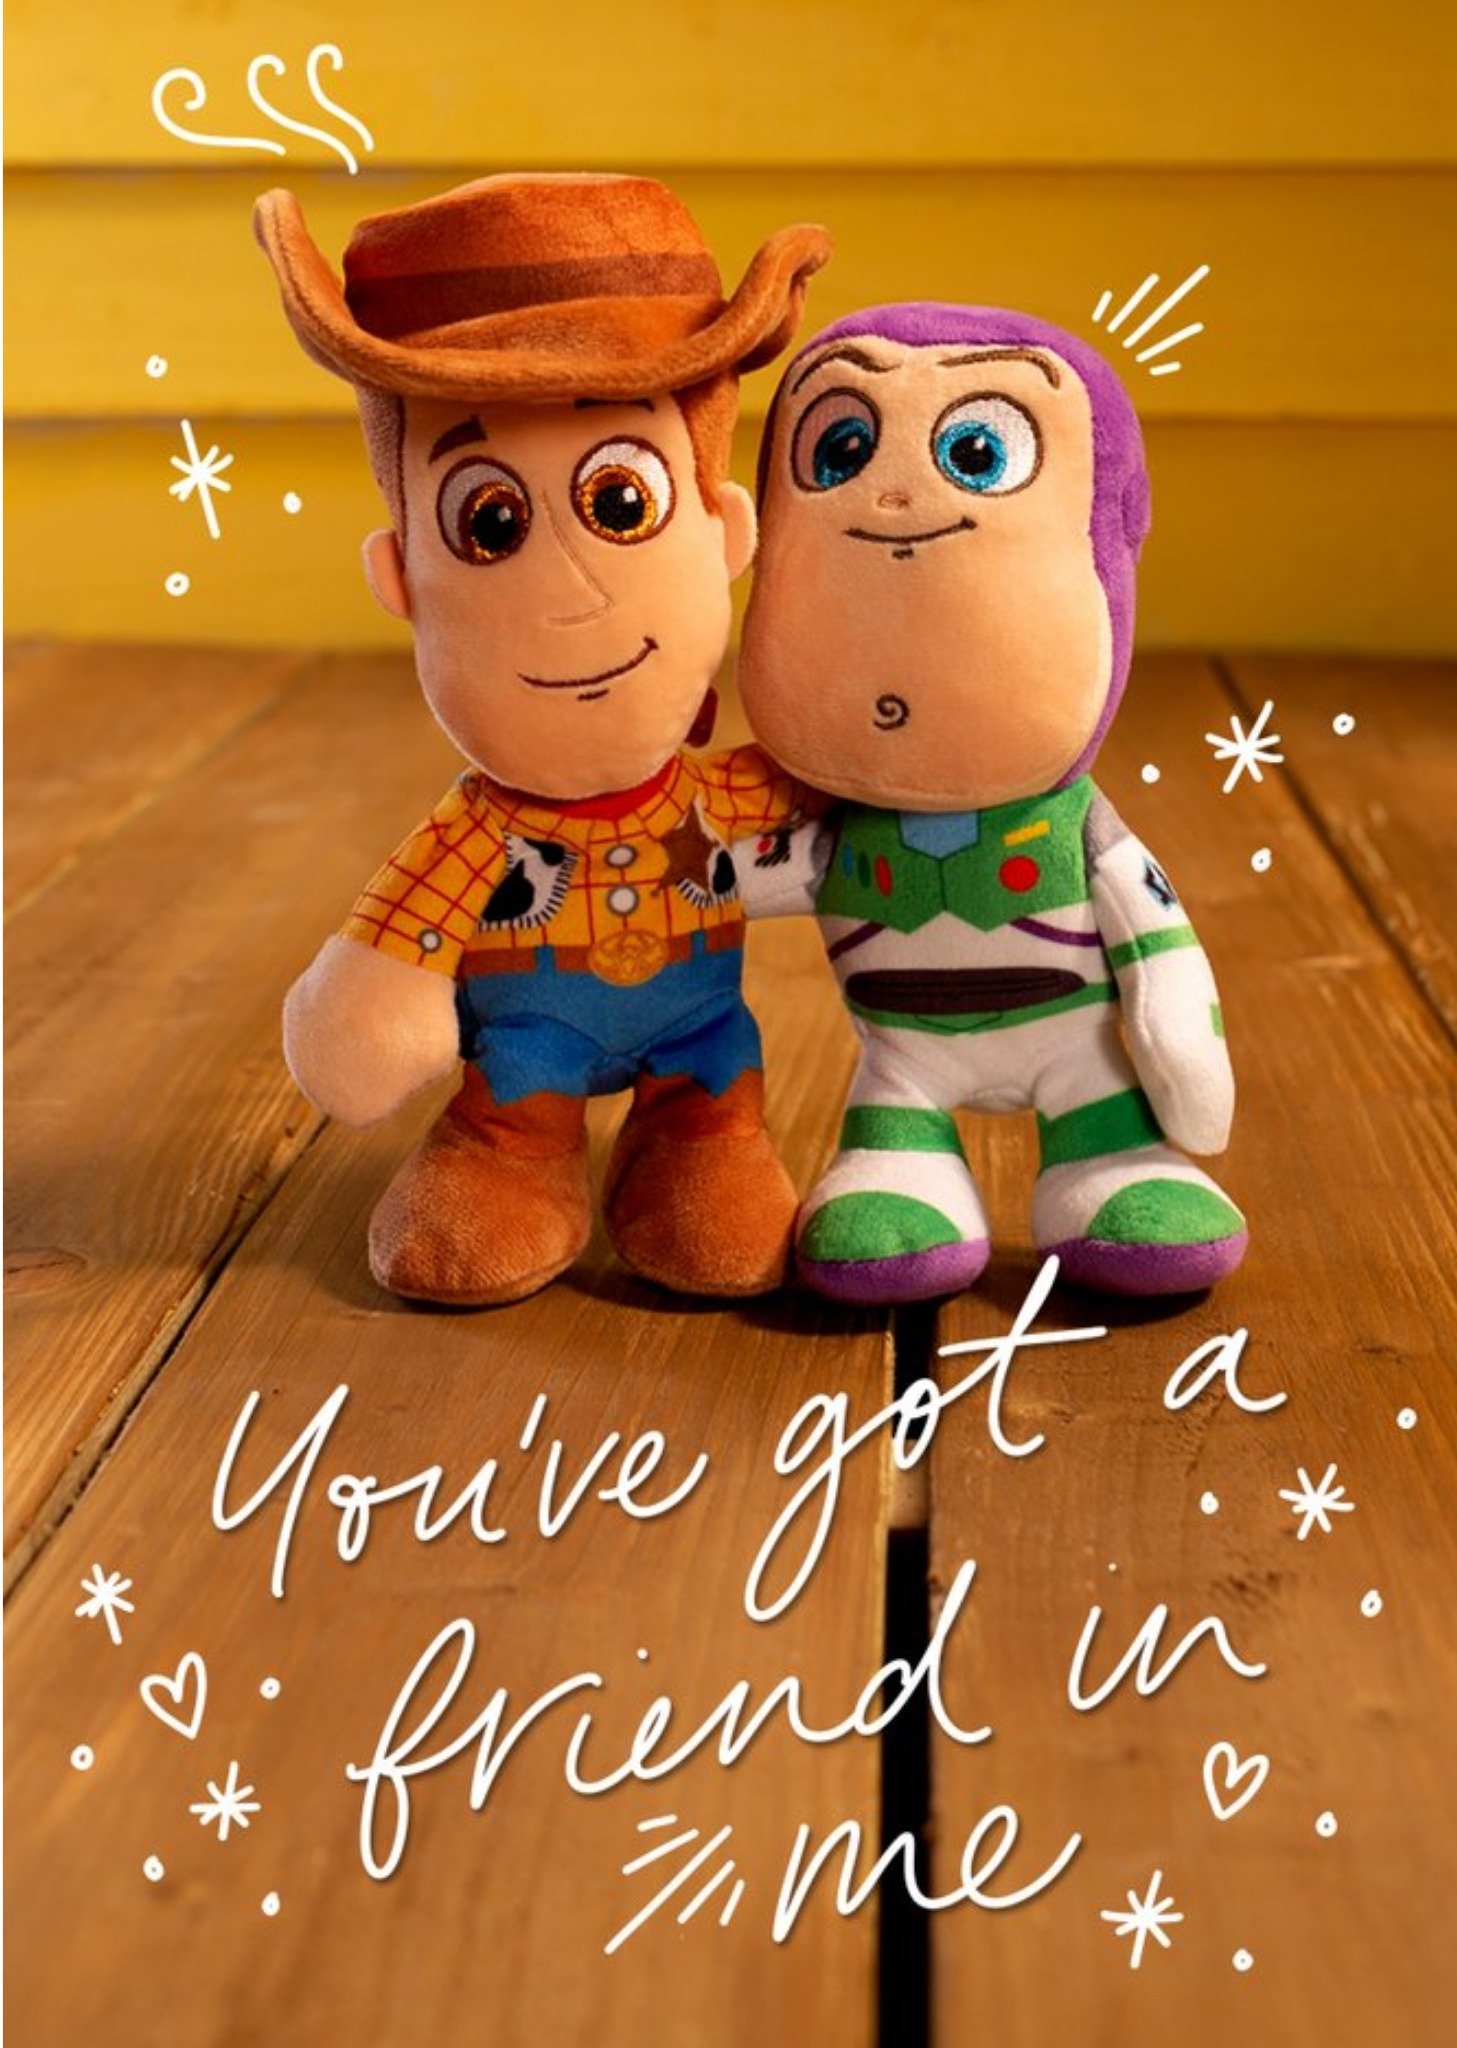 Cute Disney Plush Toy Story Woody And Buzz Friend In Me Thinking Of You Card Ecard